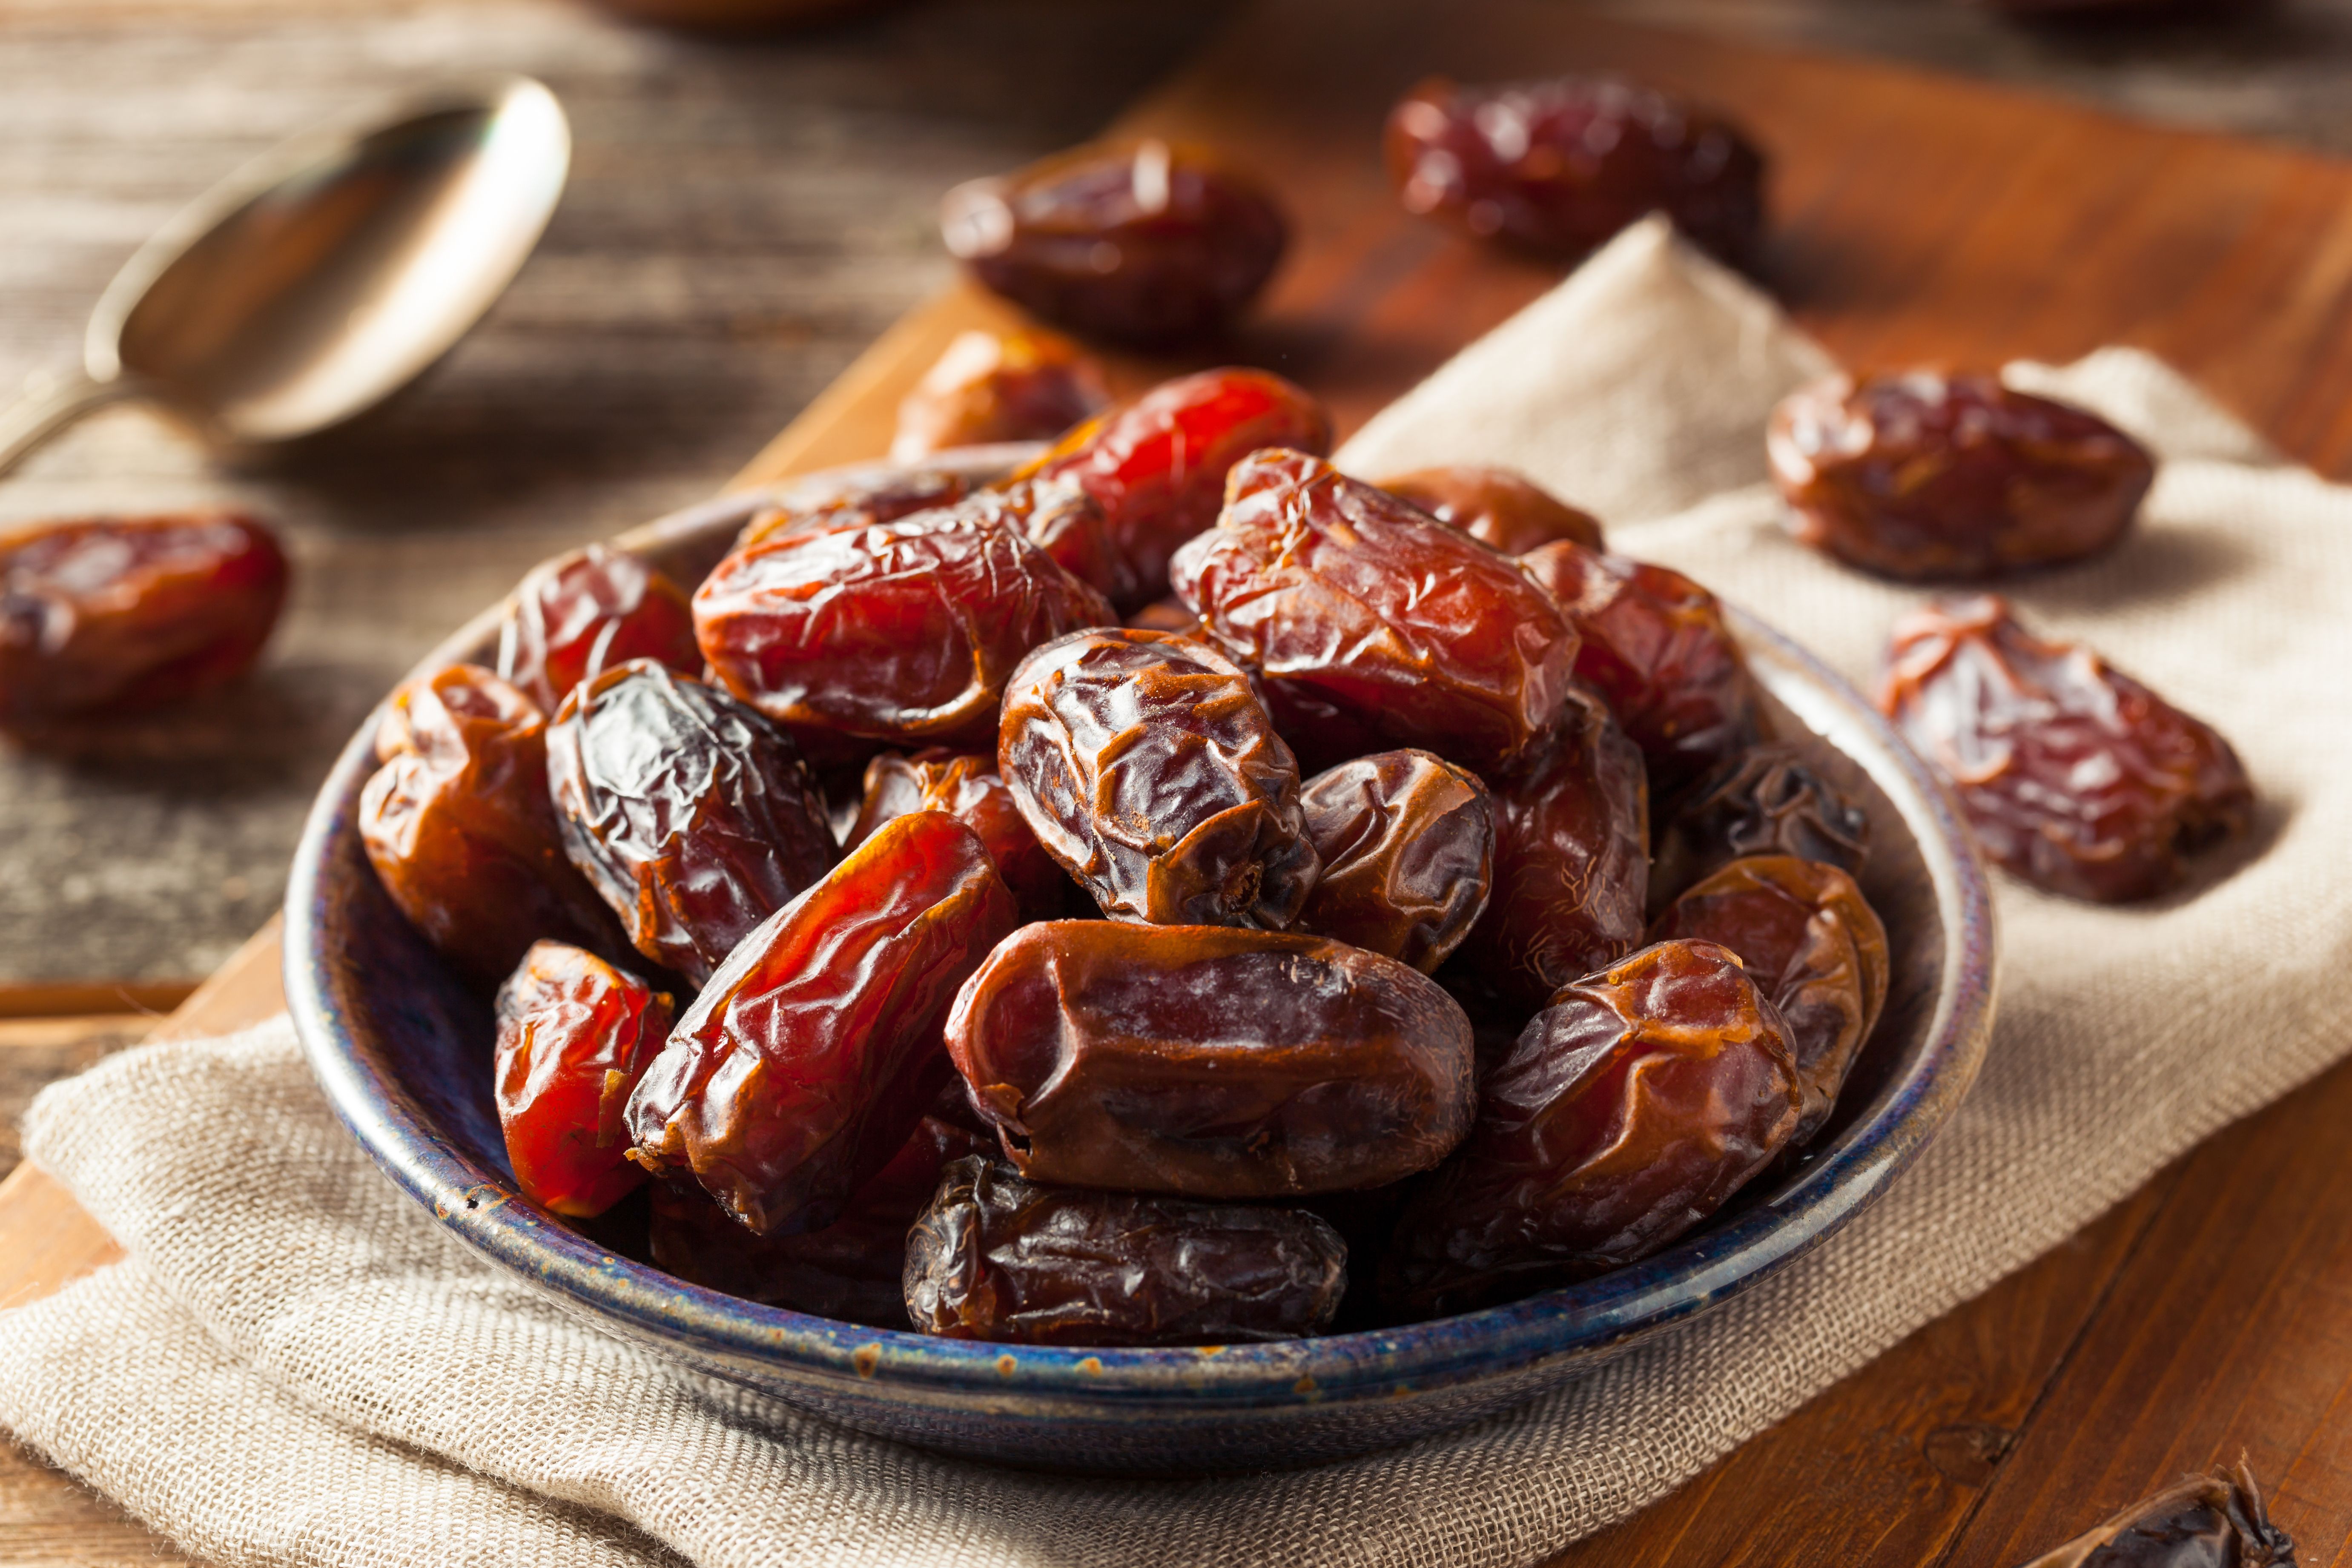 DATE & DATE PALM PRODUCTS